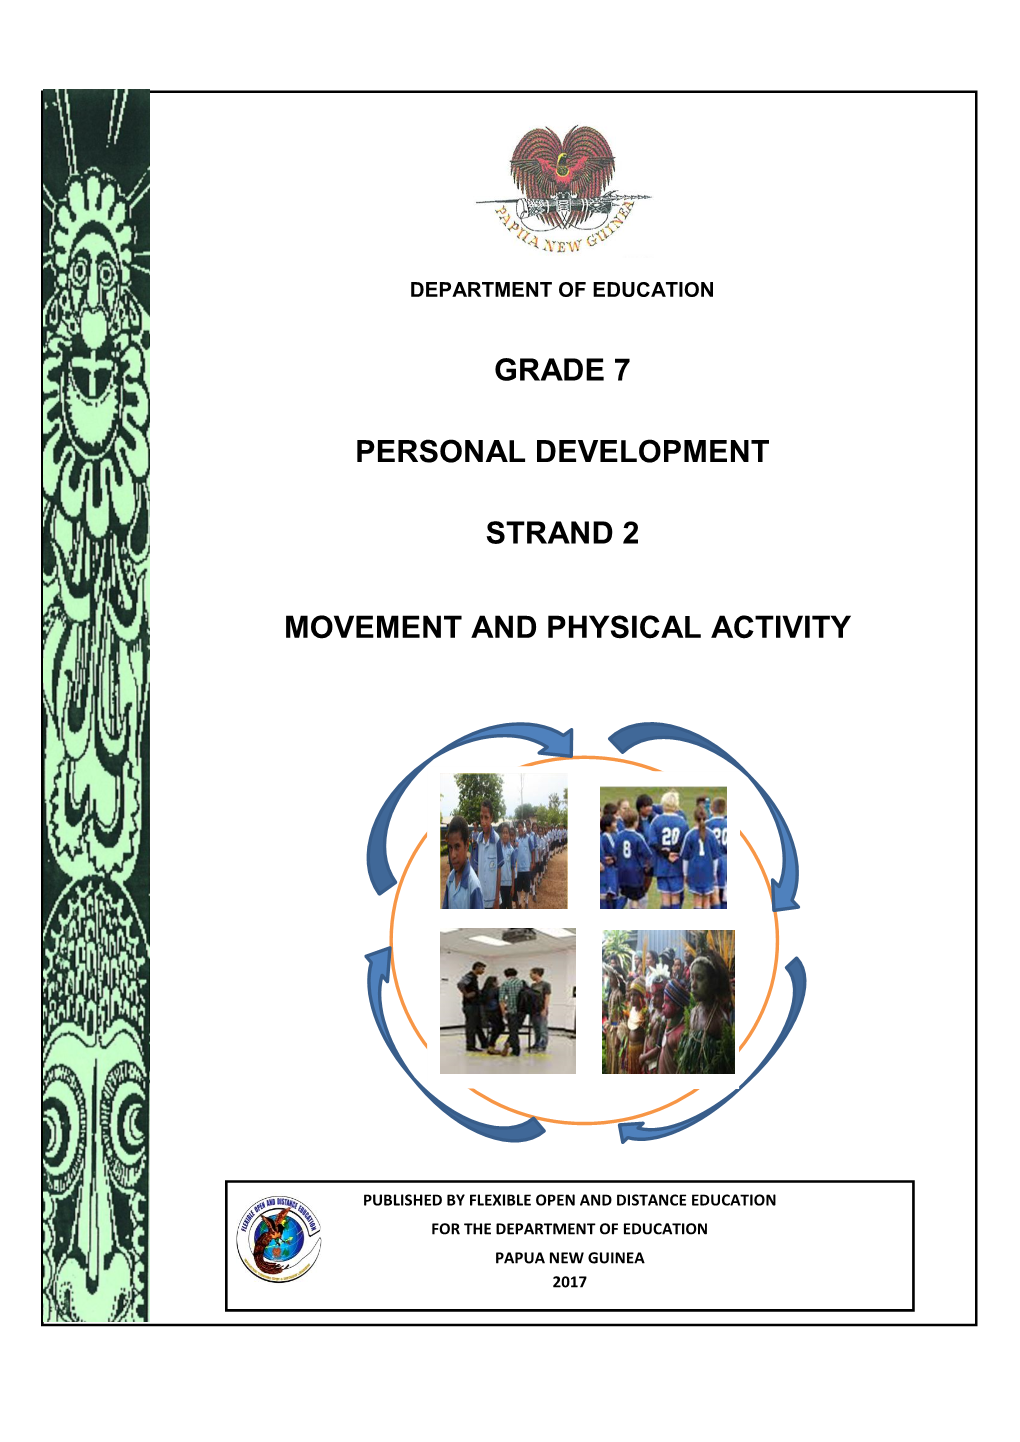 Grade 7 Personal Development Strand 2 Movement and Physical Activity